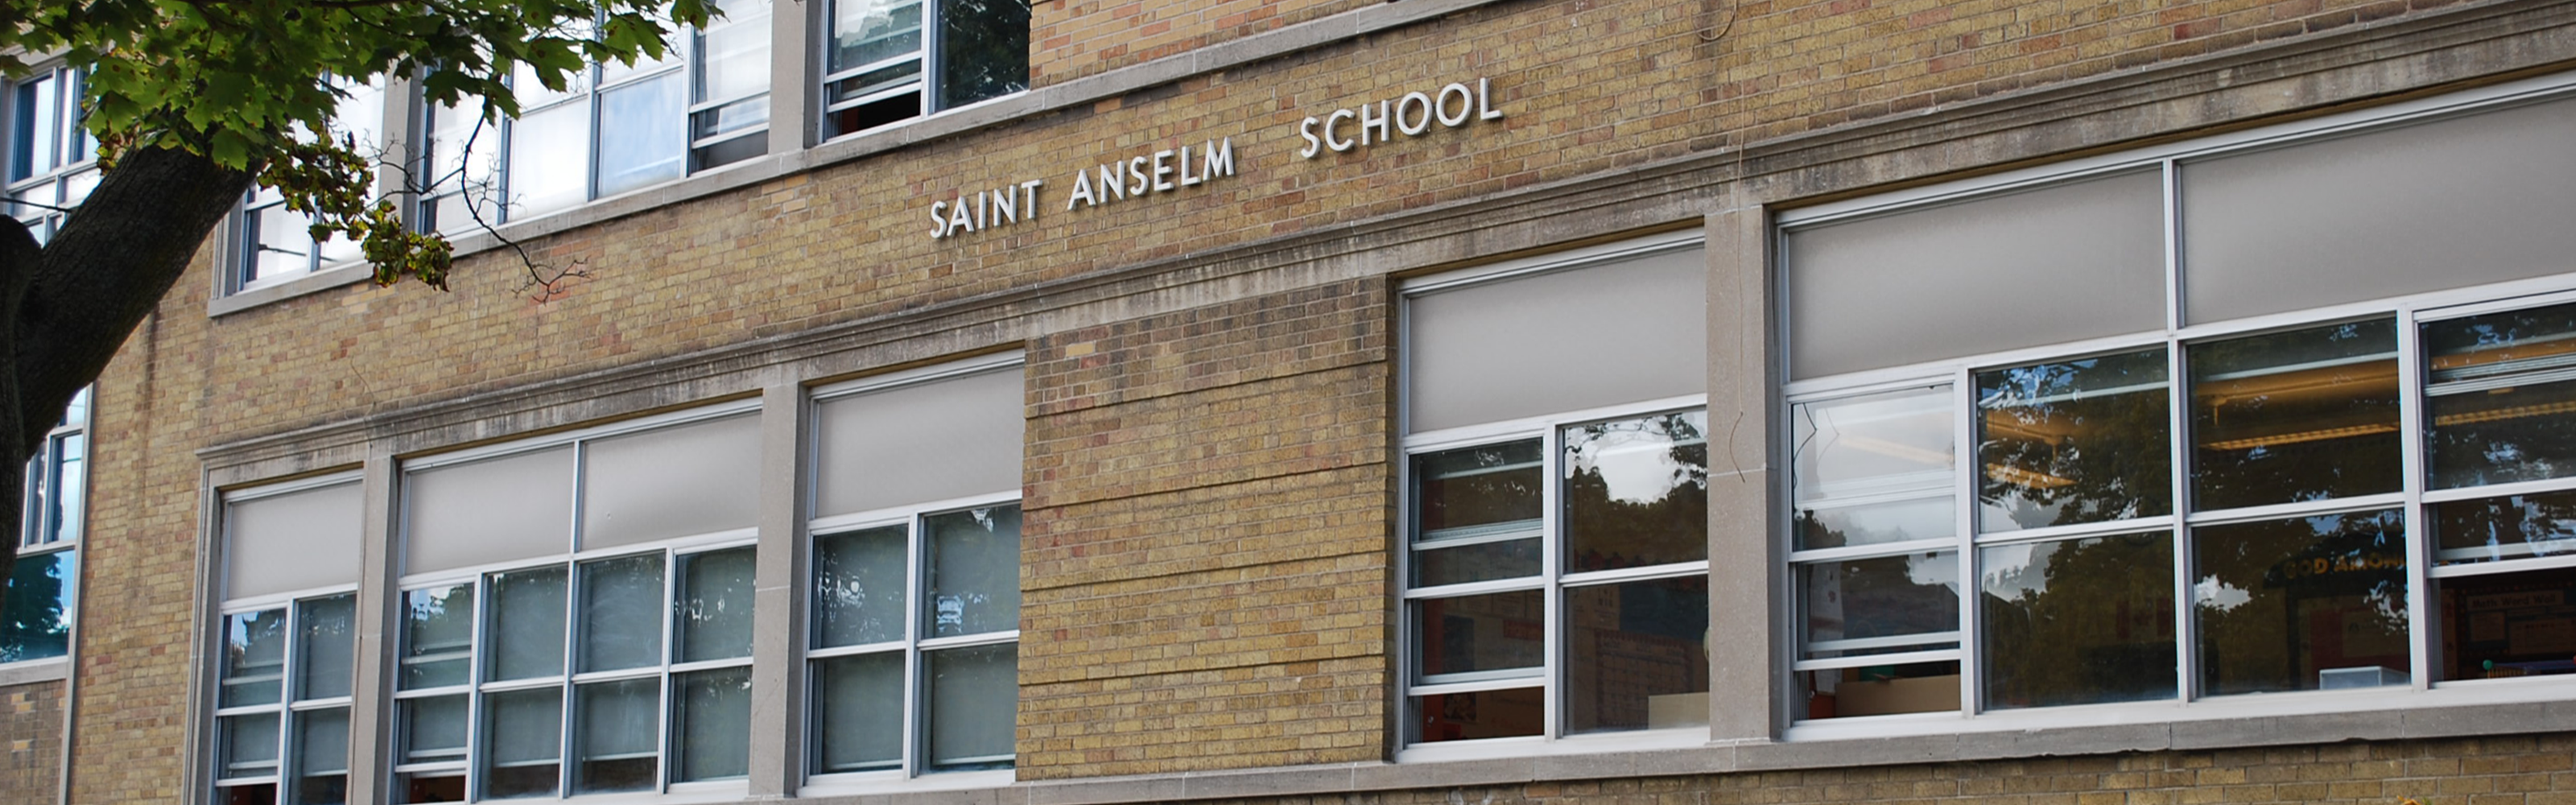 The front of the St. Anselm Catholic School building.